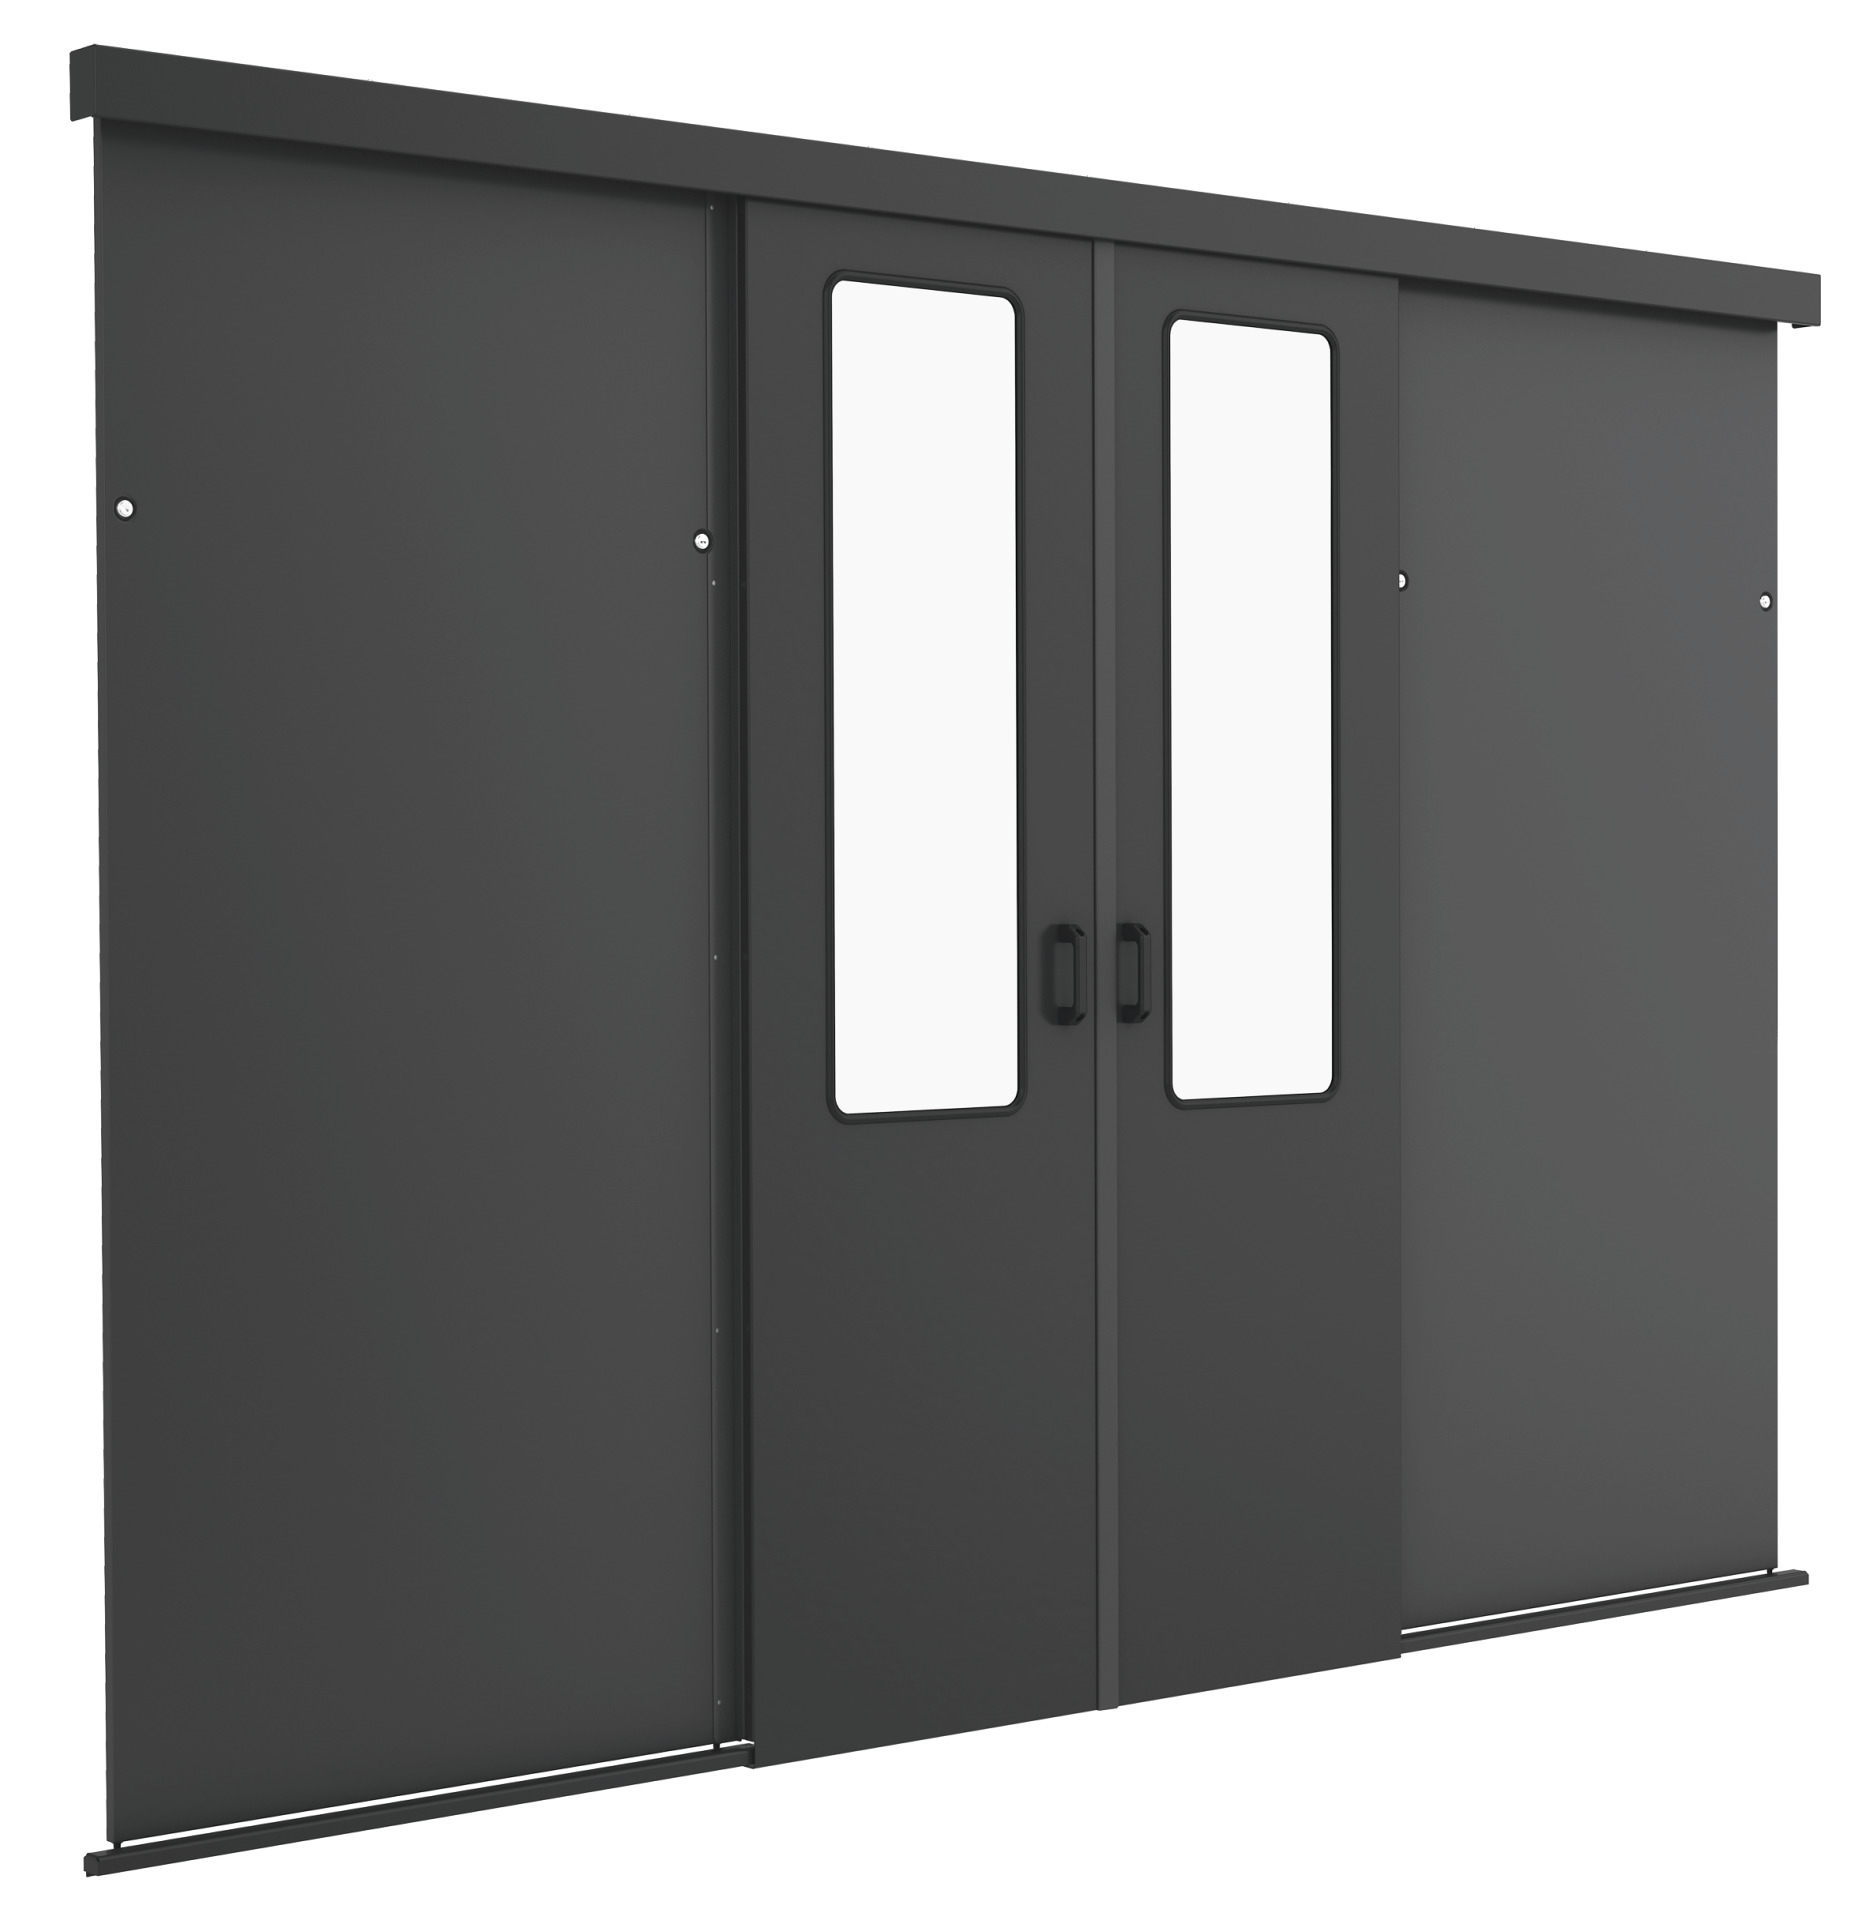 Slidiung Door for Cold/Warm Aisle for PRO 47U, 1200 mm, RAL9005